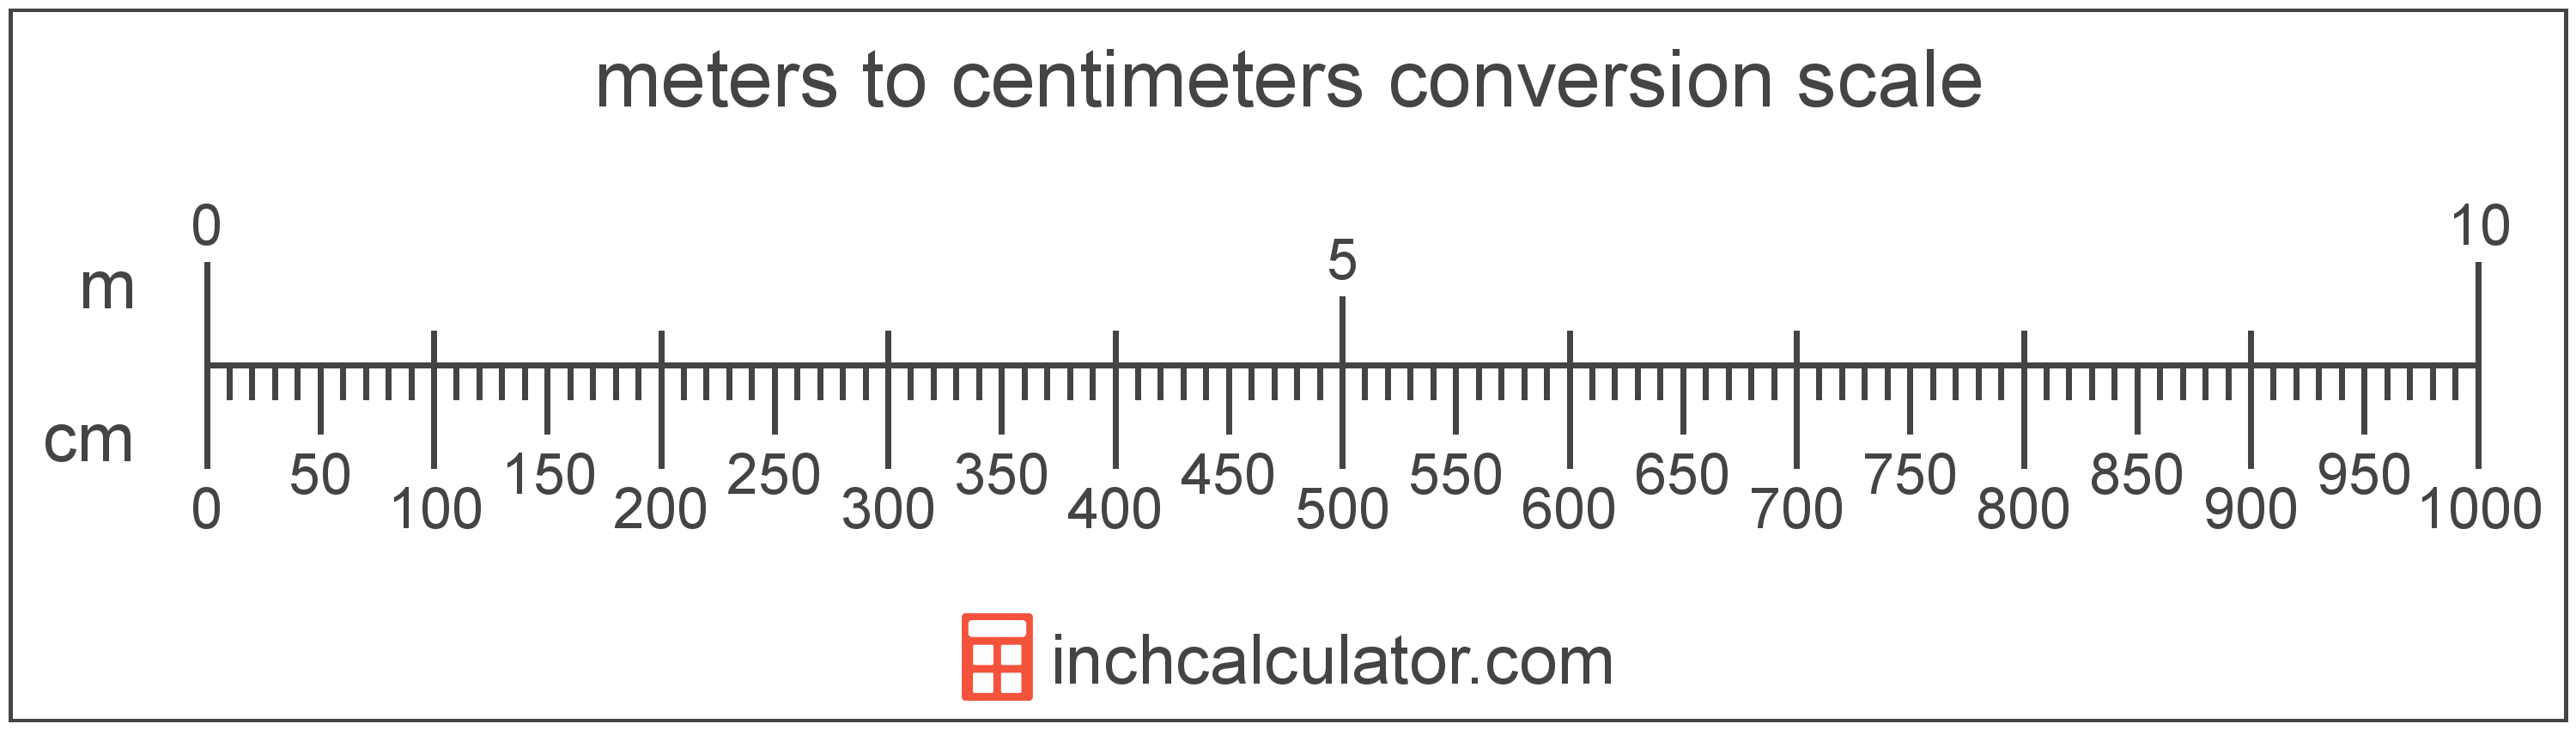 conversion scale showing meters and equivalent centimeters length values